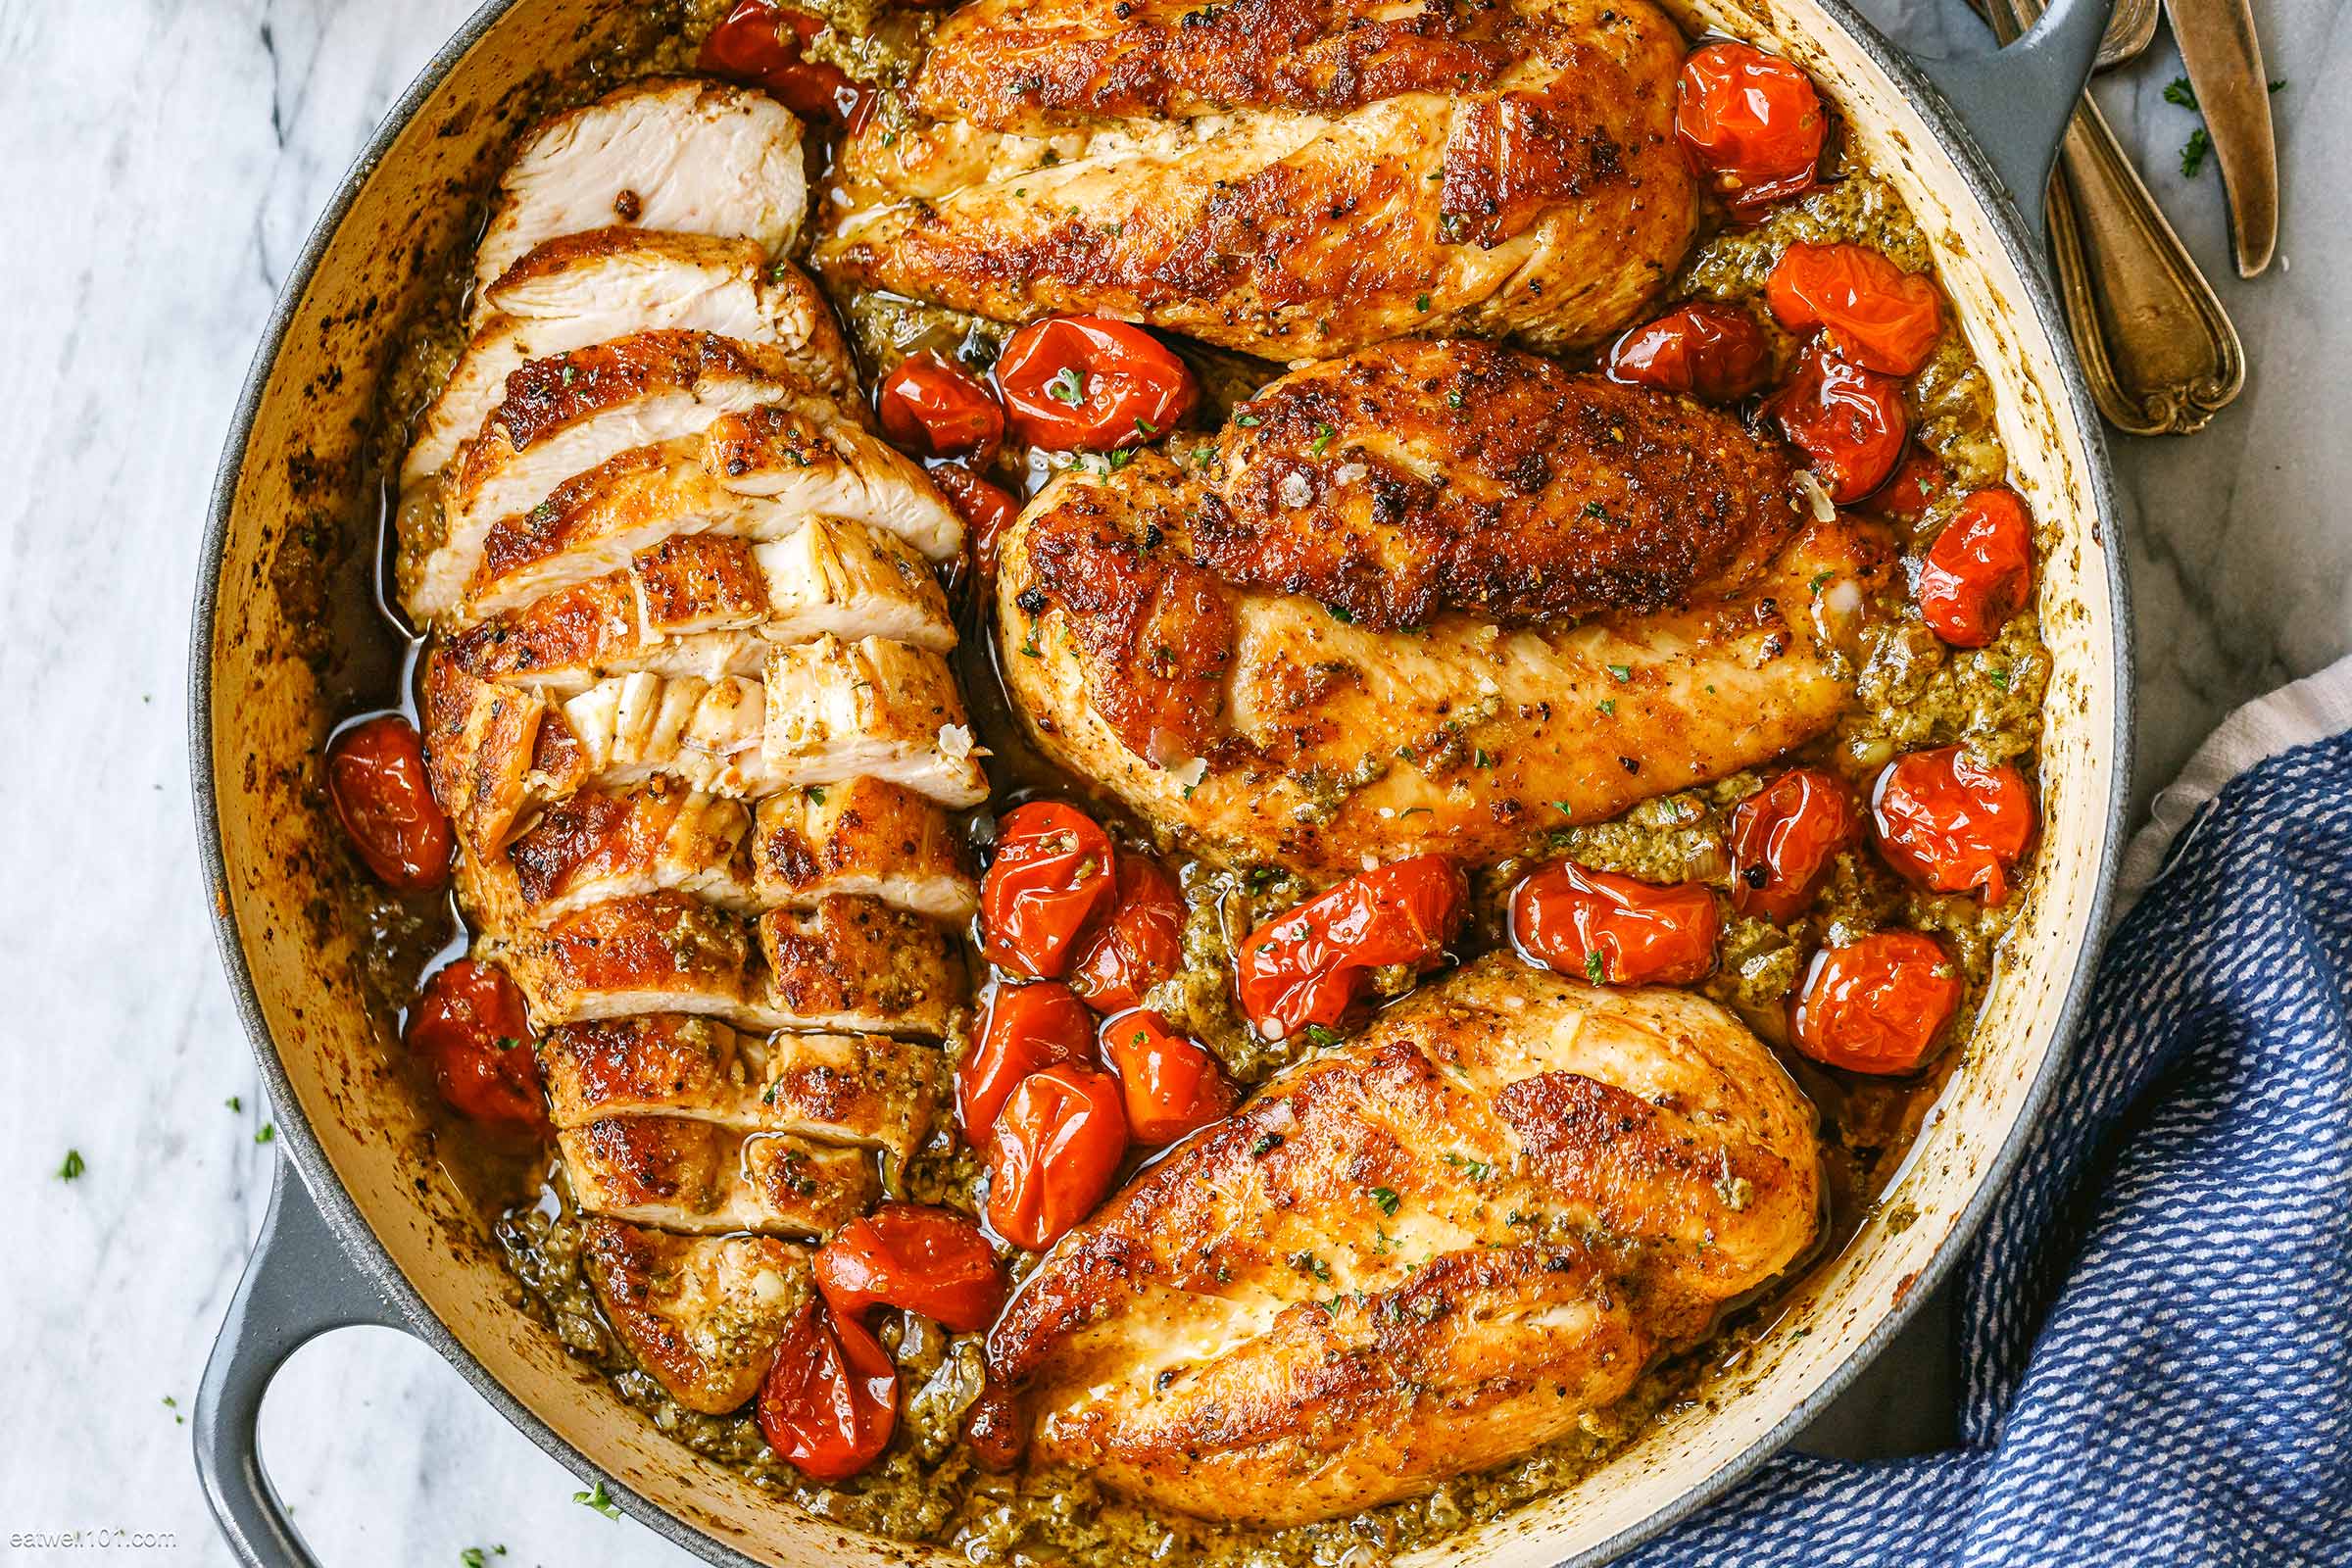 Creamy Pesto Chicken with Roasted Tomatoes